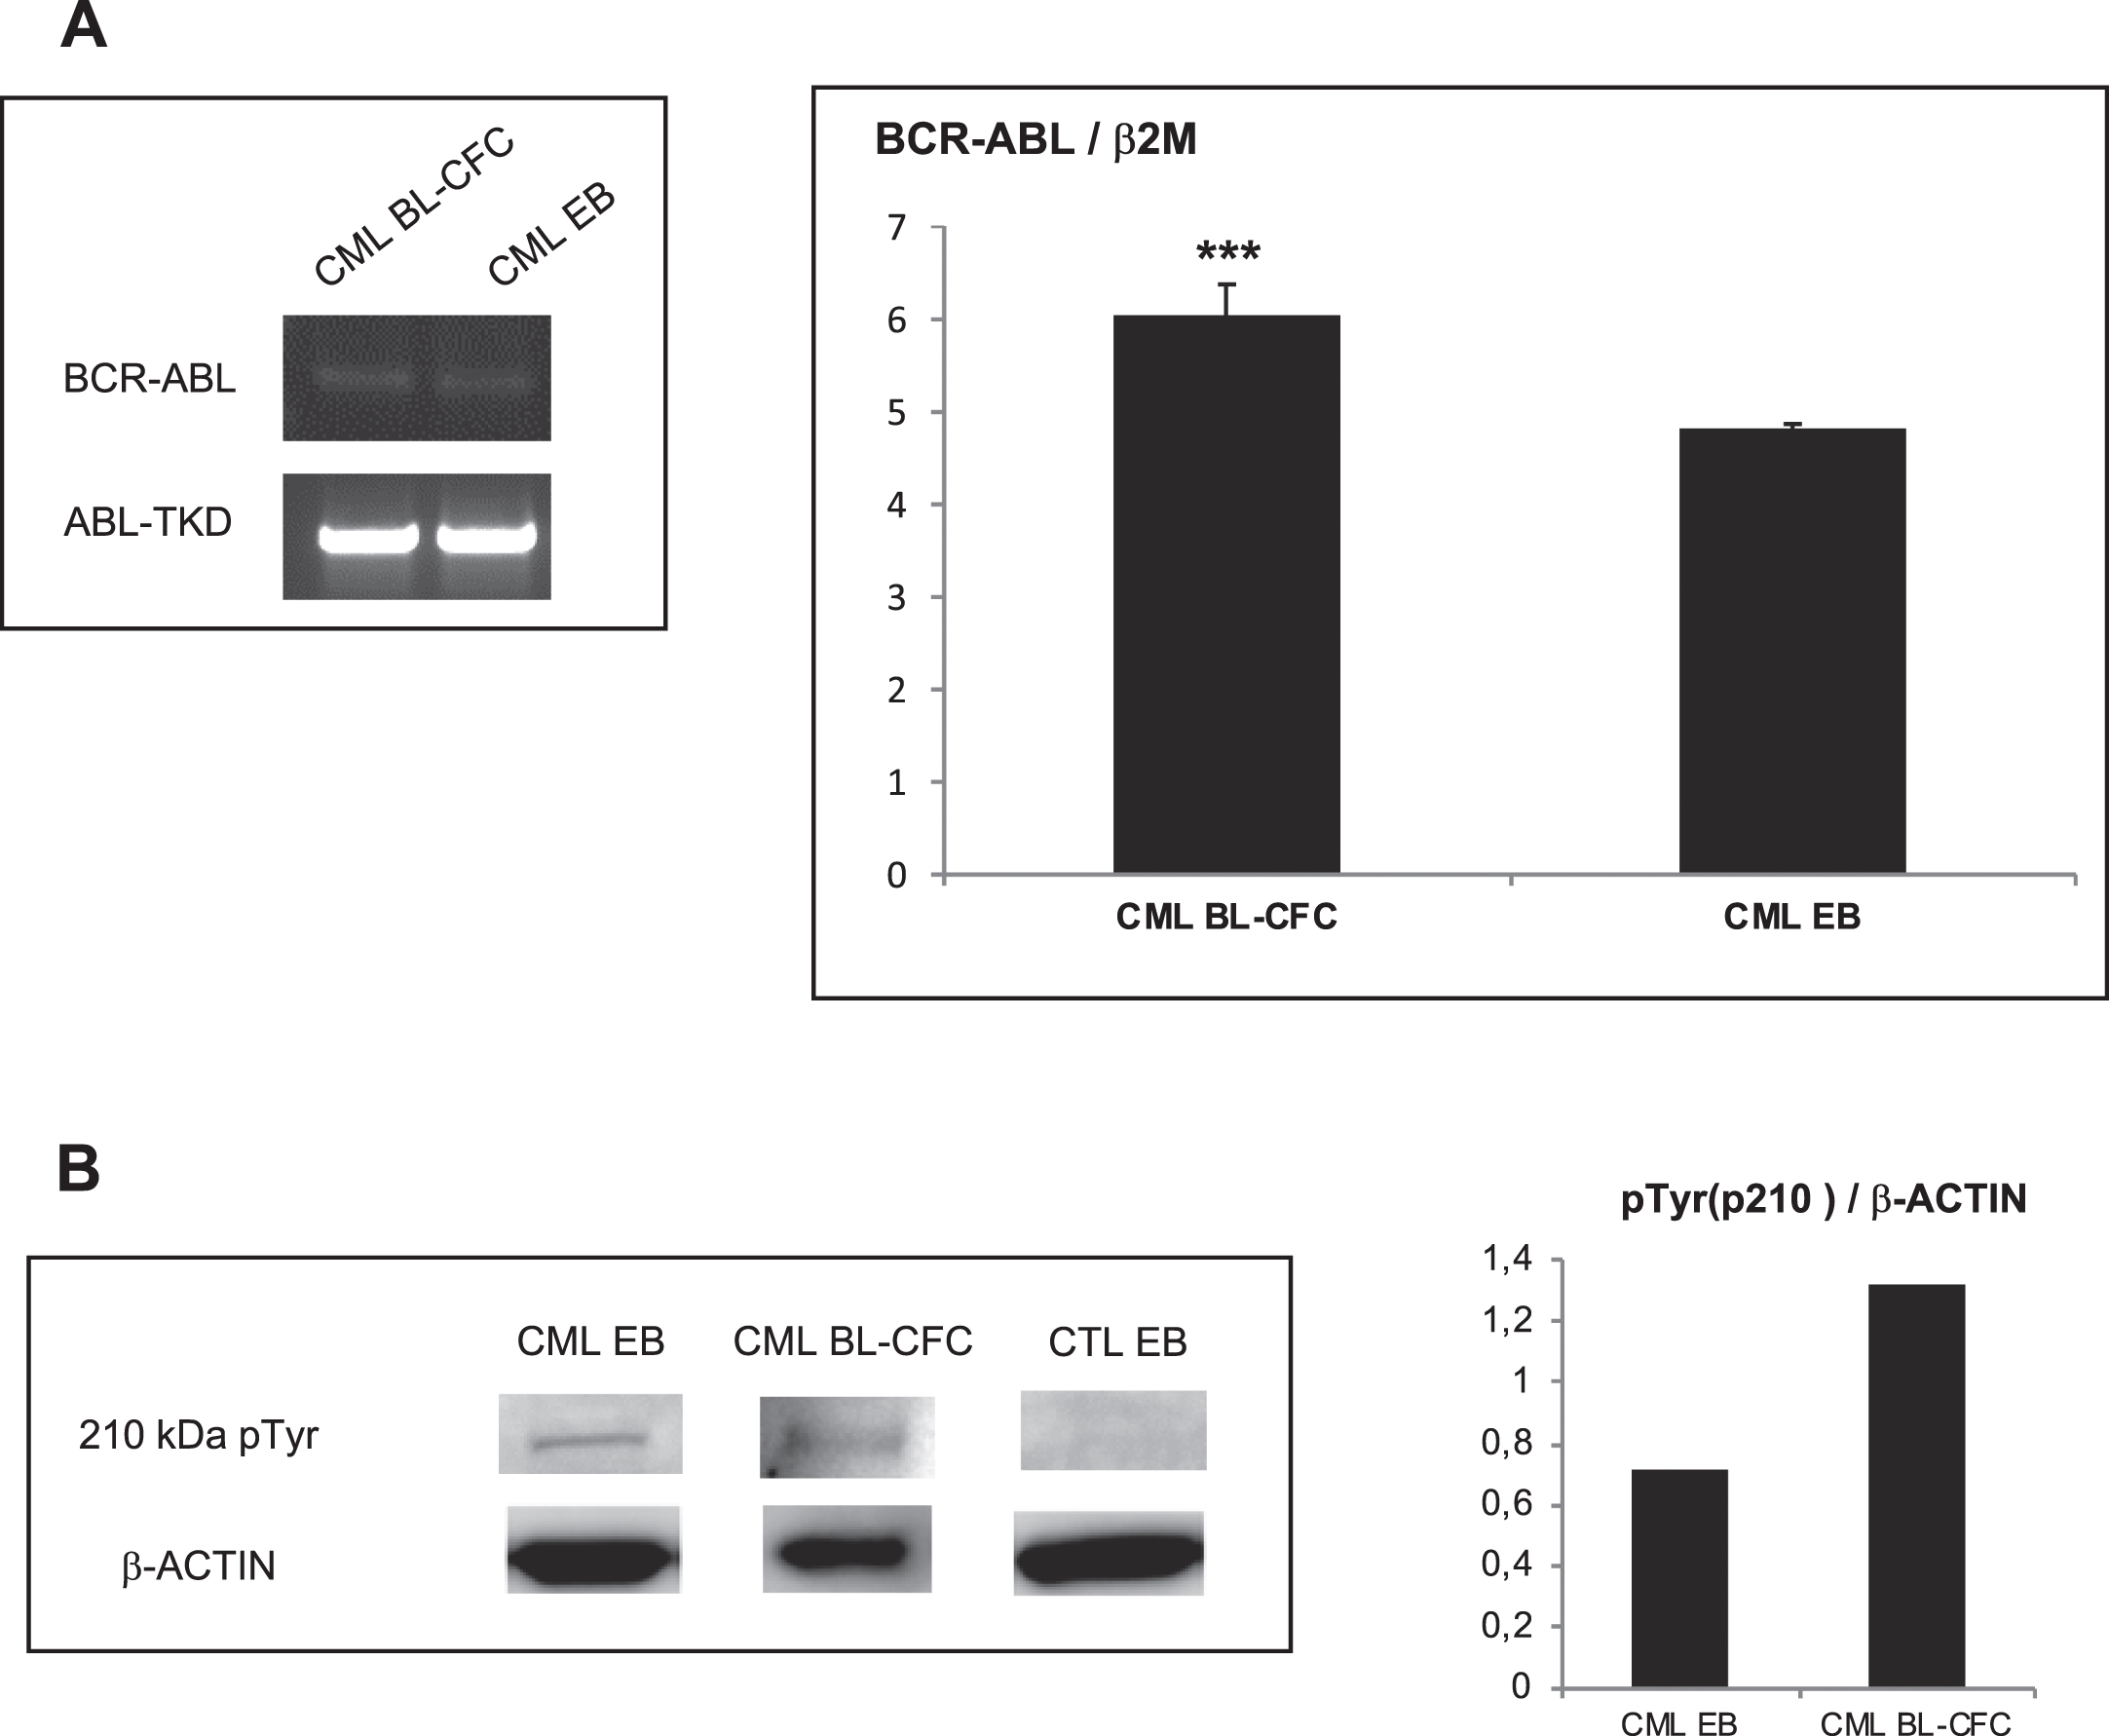 BCR-ABL expression in embryoid bodies (EBs) and Bl-CFC cells derived from CML iPSC. 5A (Left panel): PCR analysis to detect BCR-ABL in CML iPSC-derived blast colony forming cells (Bl-CFC) and embryoid bodies (EB). 5A (Right panel): Expression profile of BCR-ABL gene by RT-qPCR in CML iPSC-derived Bl-CFC and EB. 5B (Left panel): Western blot analysis to detect BCR-ABL phosphorylation level using a phospho-tyrosine antibody. 5B (Right panel): ImageJ quantification of pTYR in iPSC-derived EB and Bl-CFC.